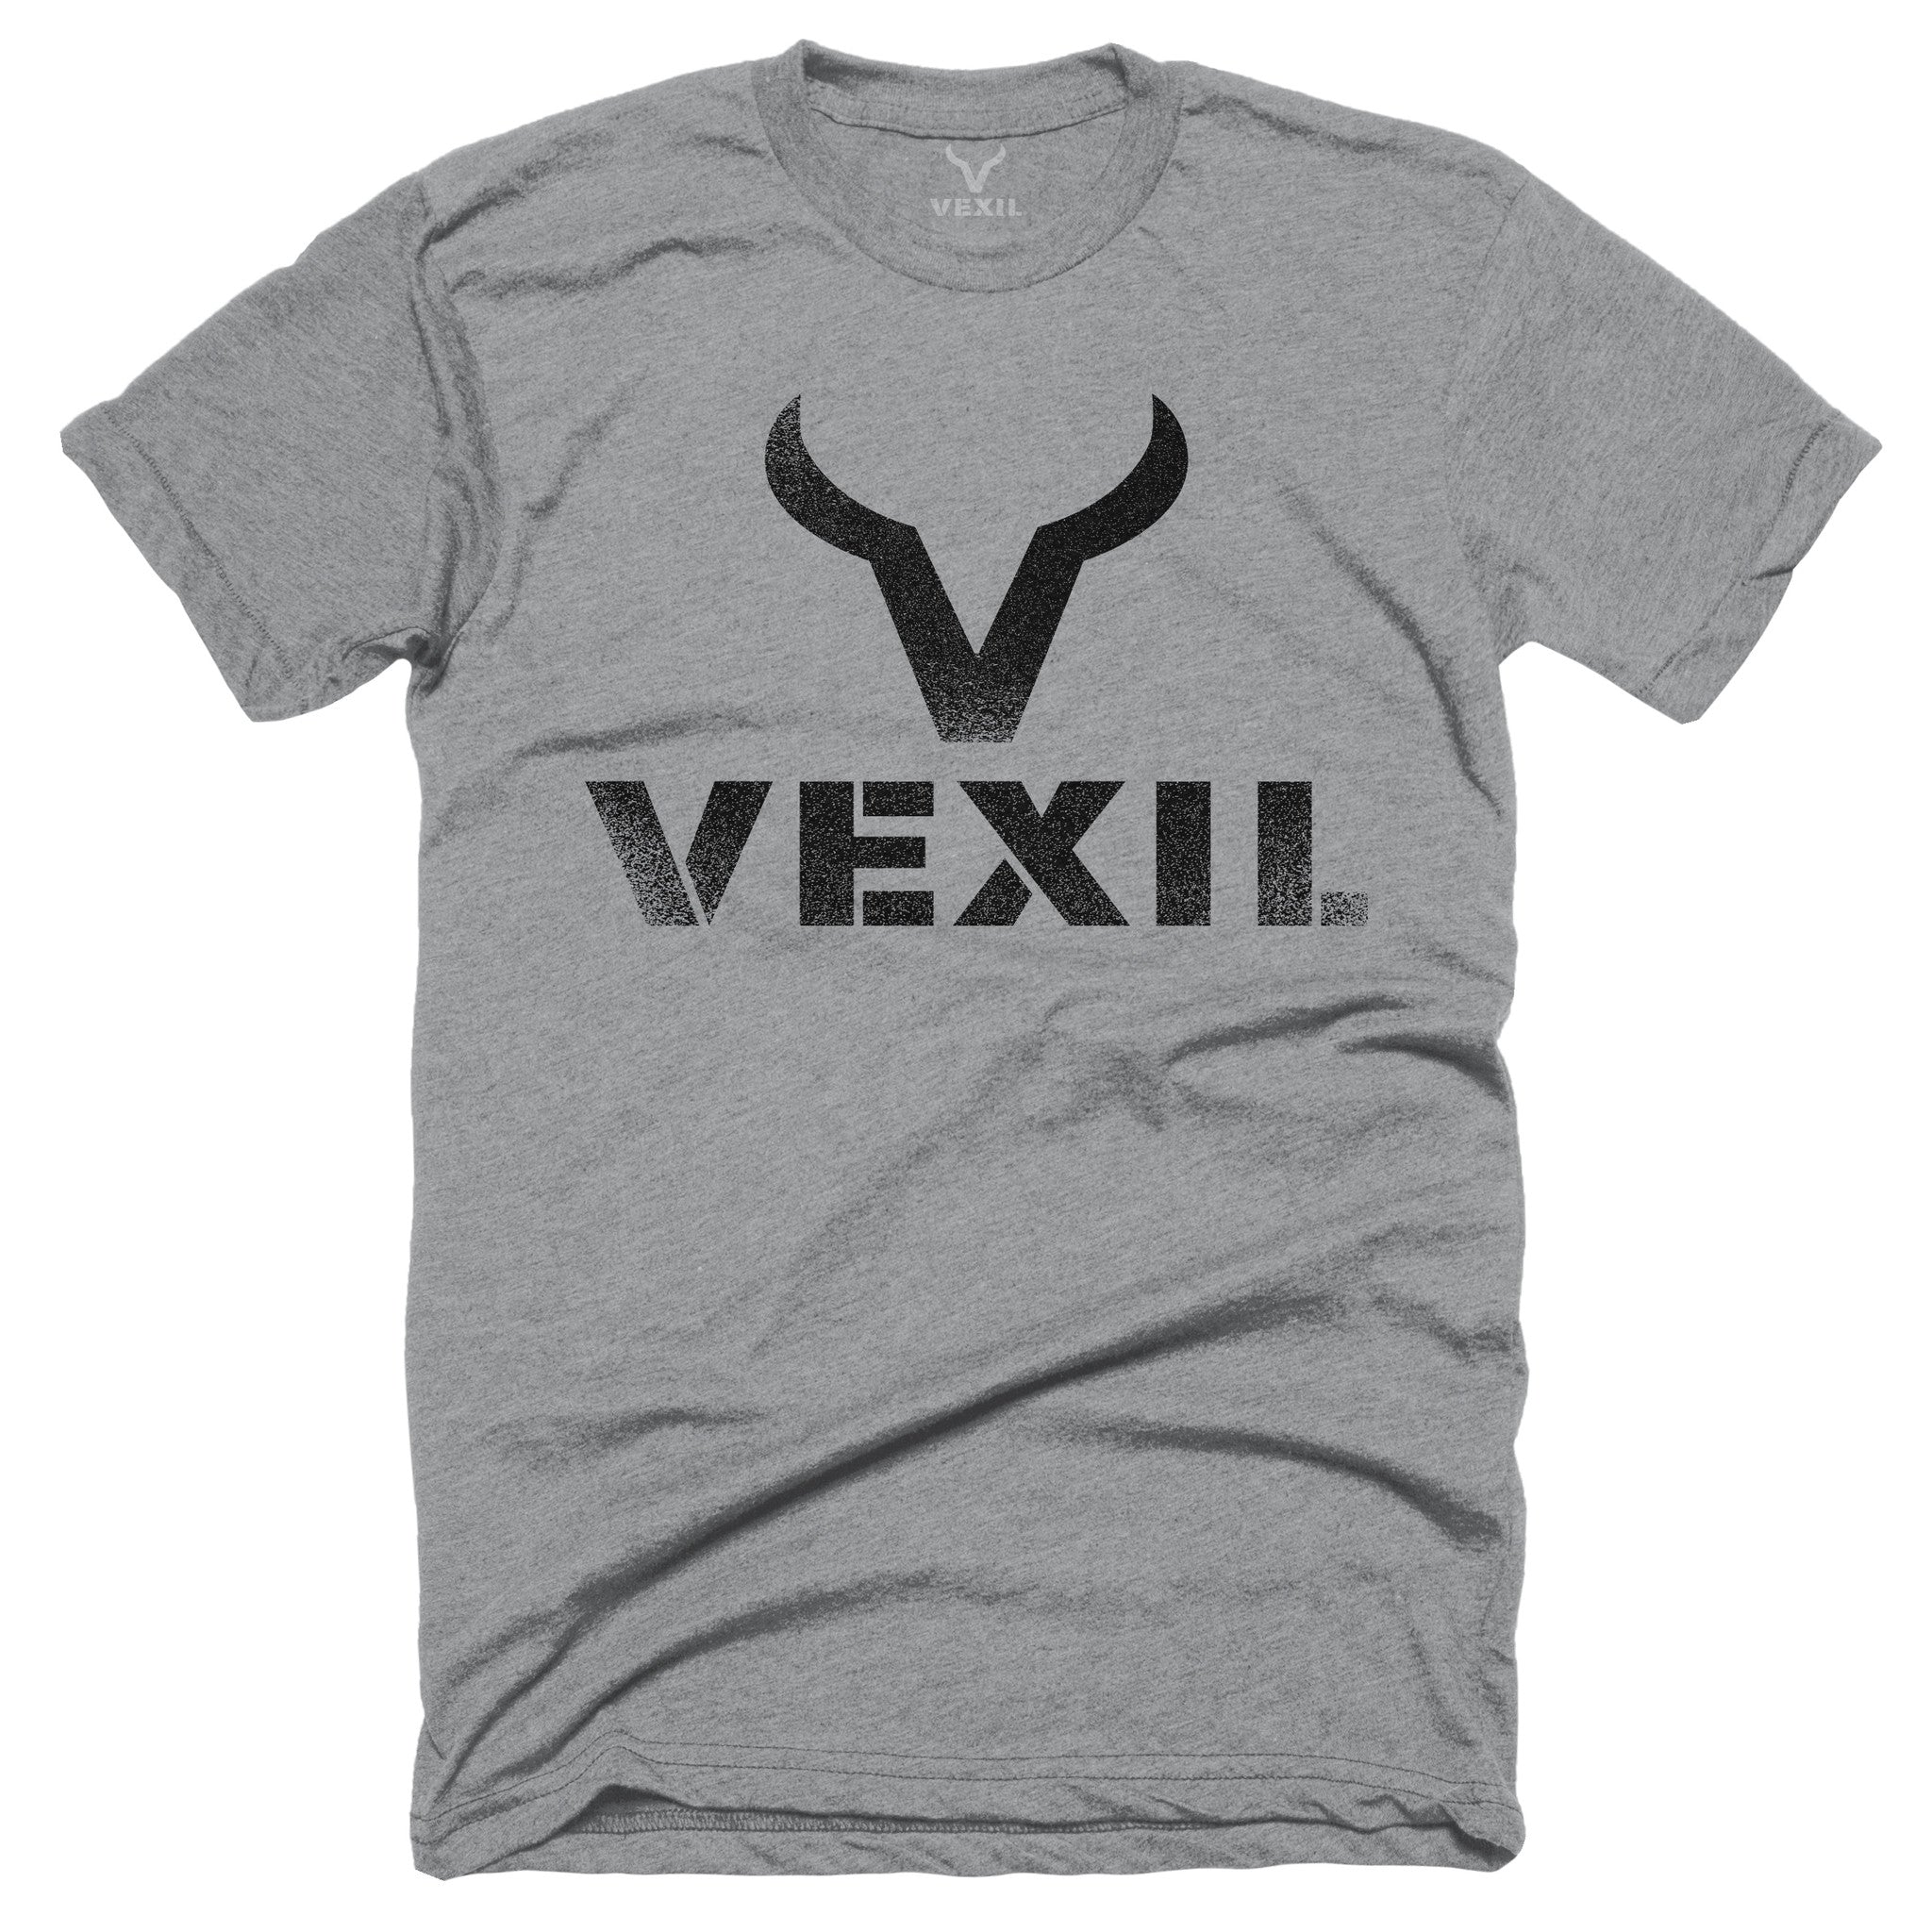 VEXIL BRAND - BE STRONG & COURAGEOUS. BE A COWBOY.